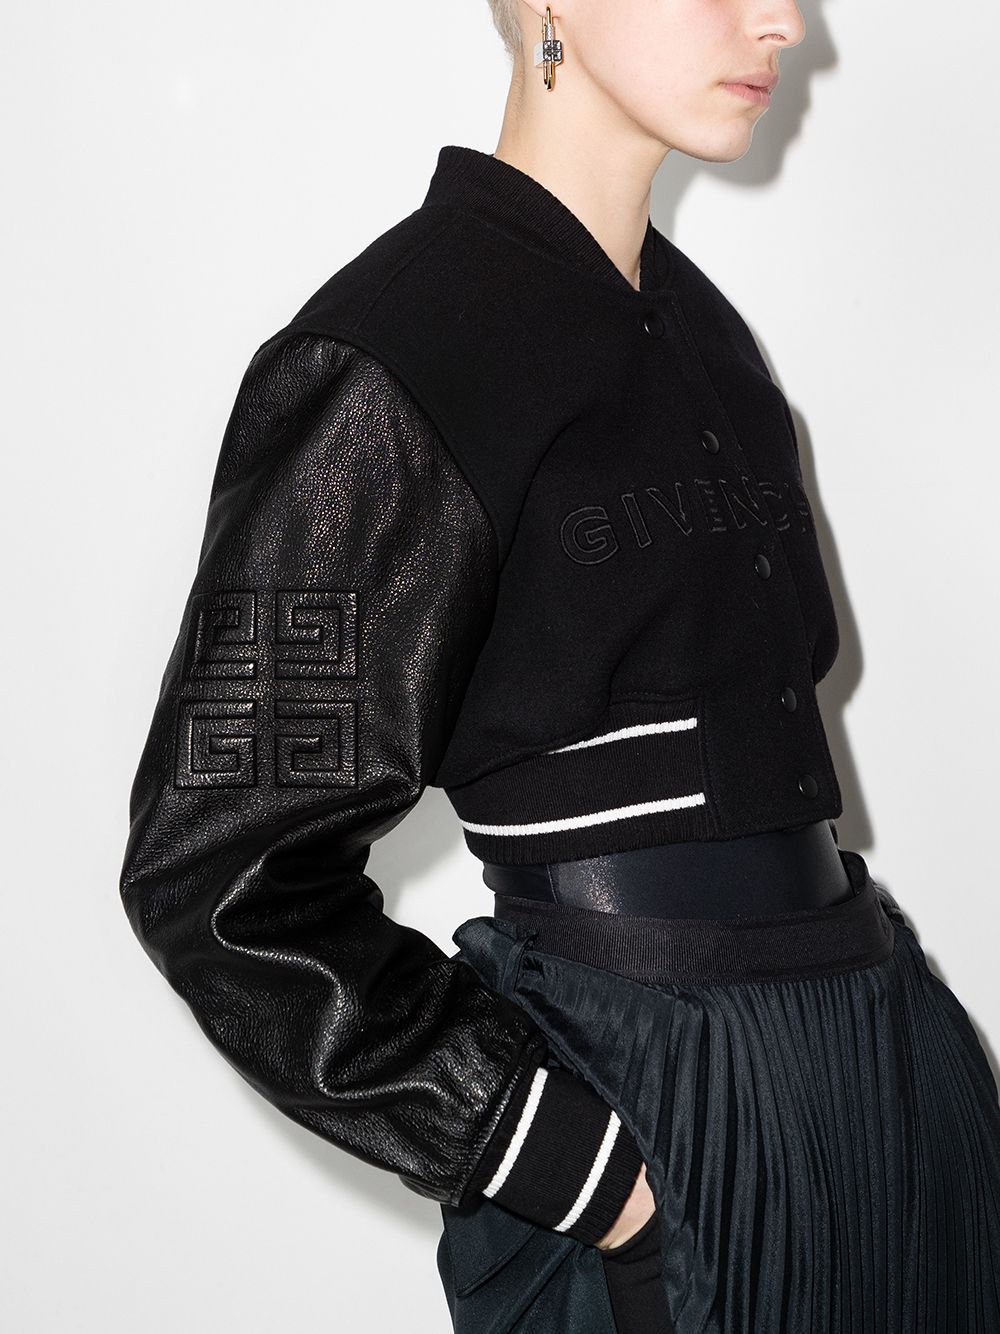 Sophisticated Cropped Bomber Jacket for Women - Black